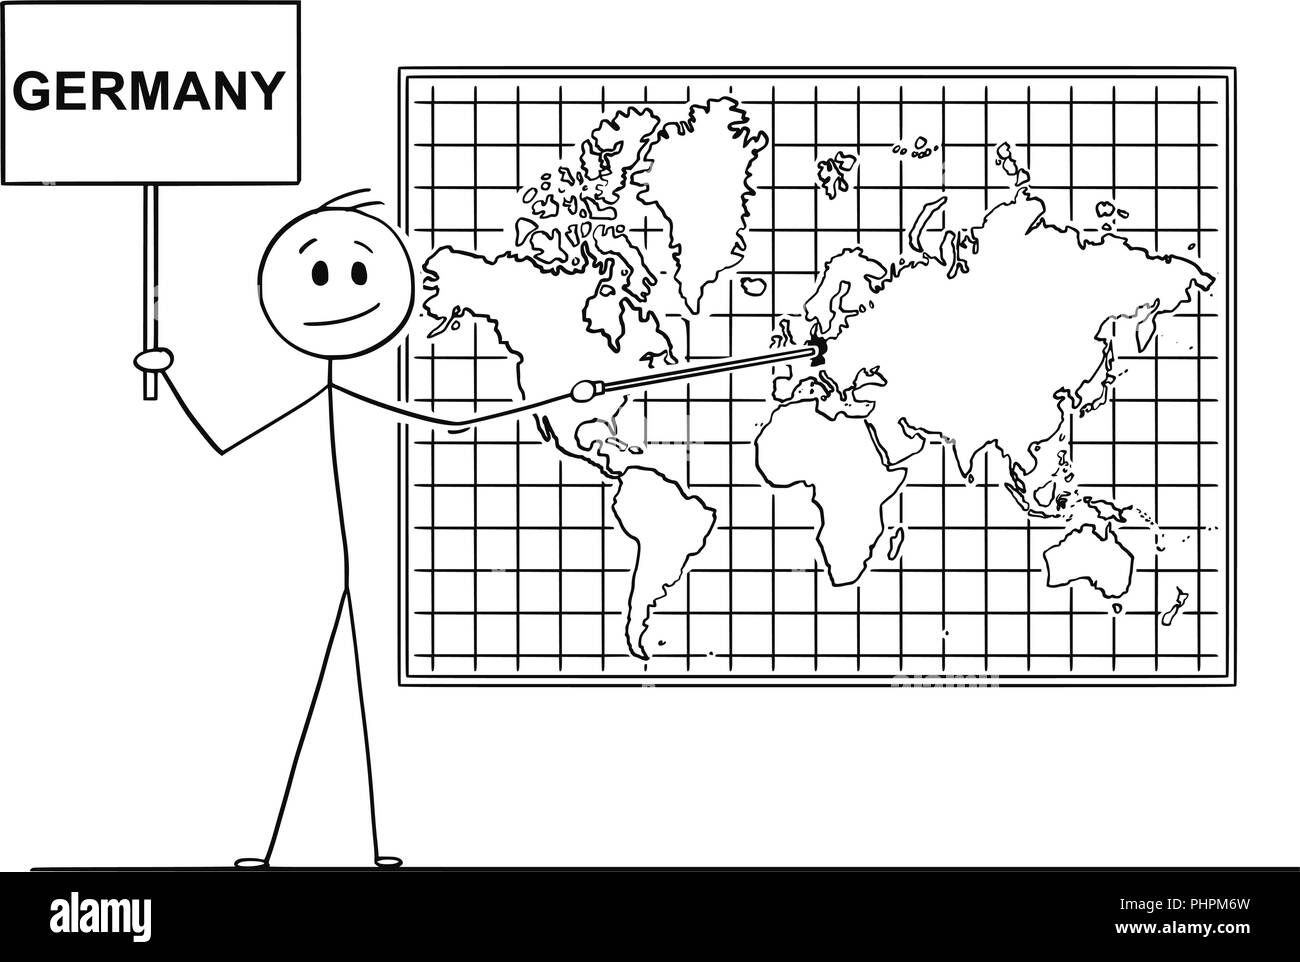 Cartoon of Man Pointing at Germany on Wall World Map Stock Vector